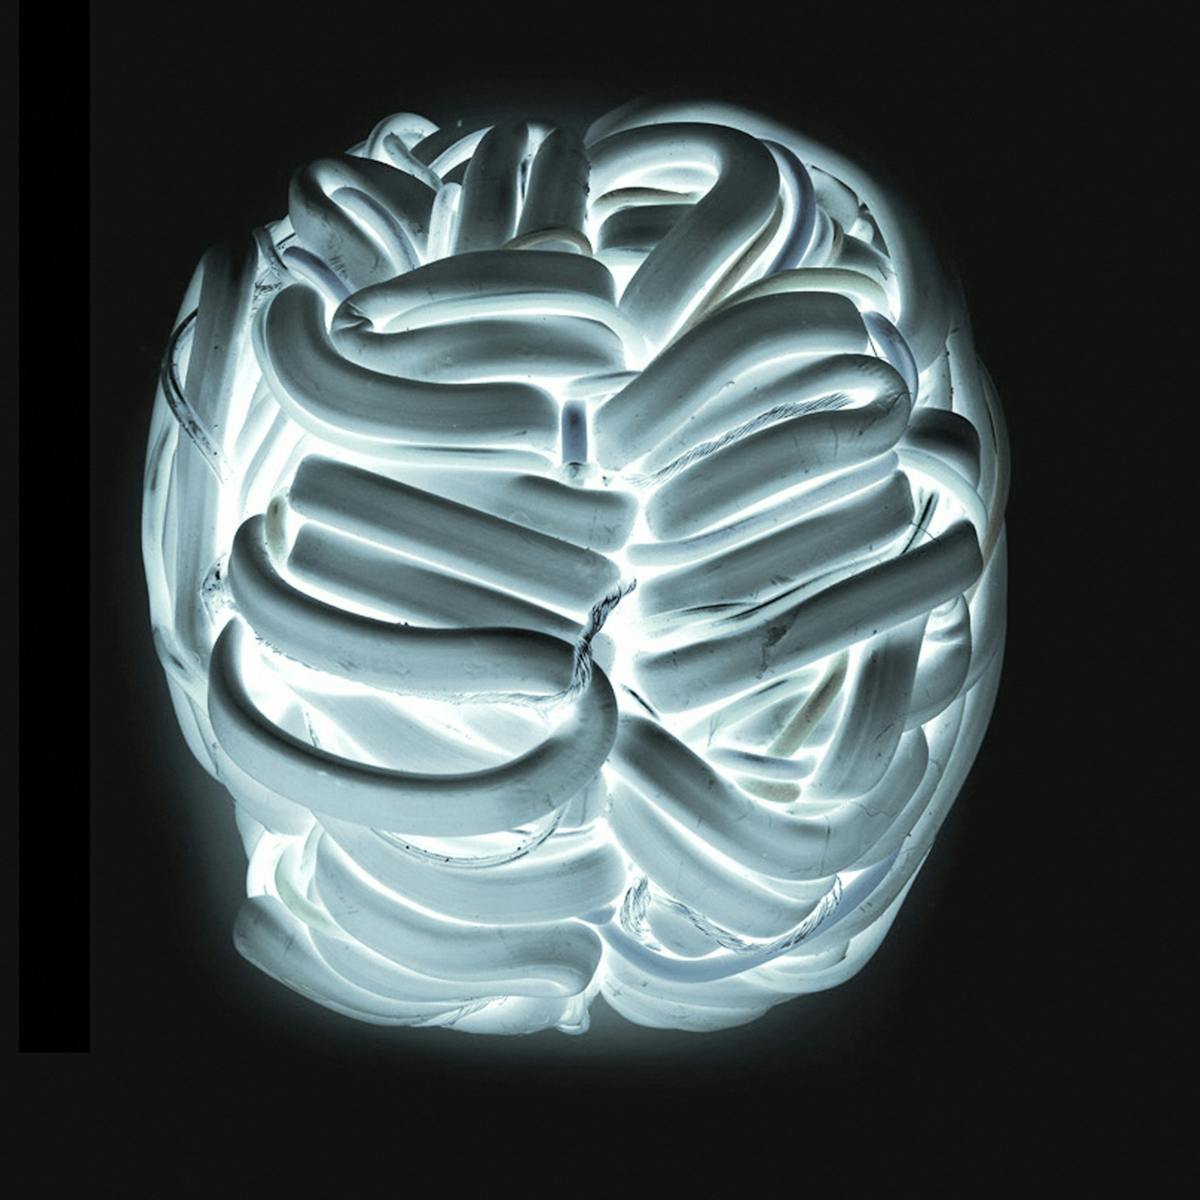 Wires covered in a white polymer twisting and turning to form an artistic representation of the brain